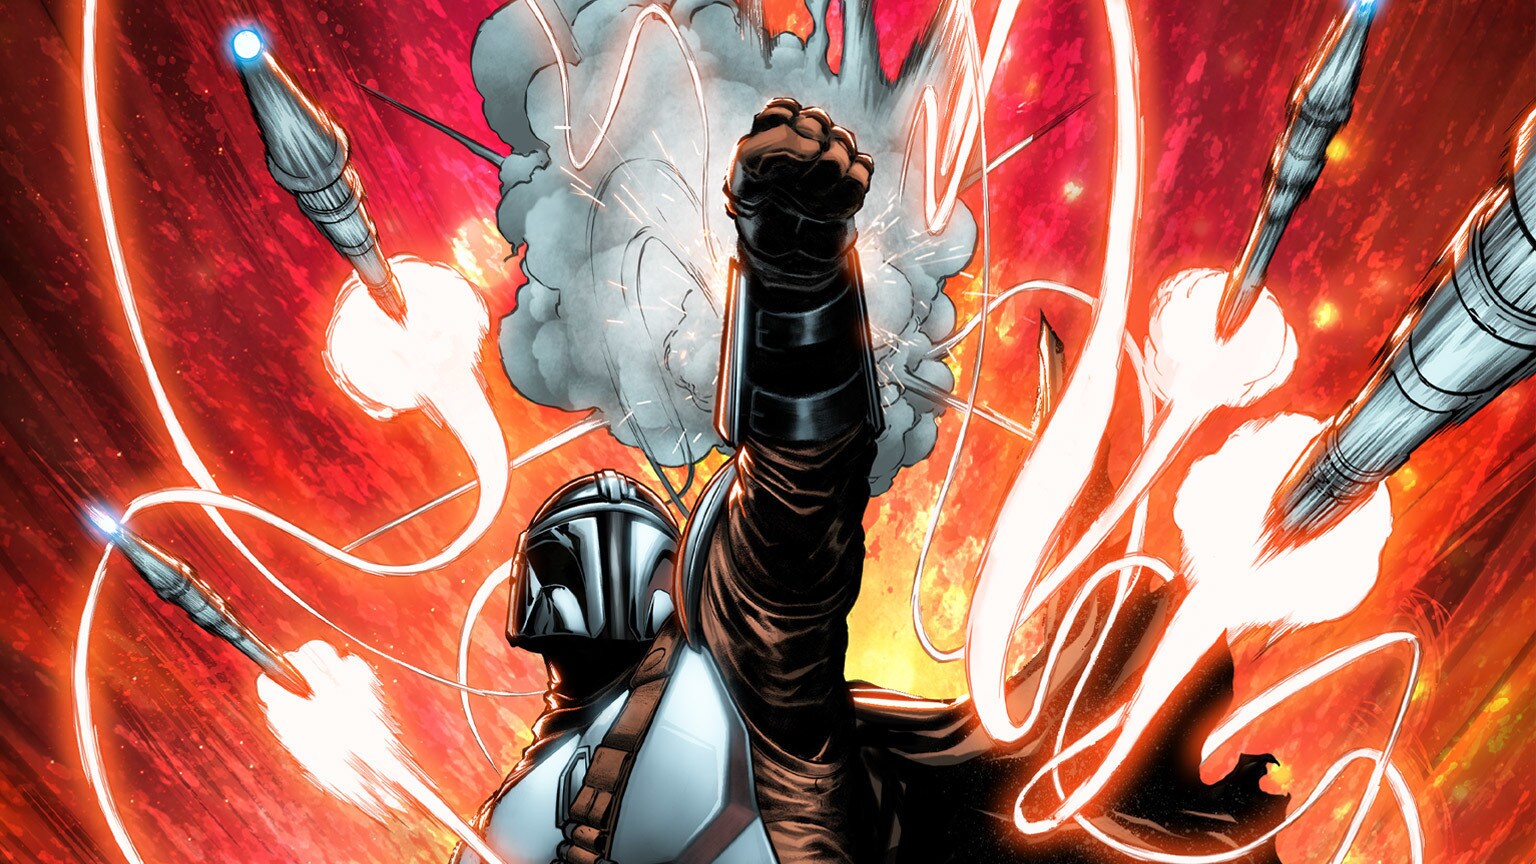 An Upgrade — and New Tensions — in Marvel’s Star Wars: The Mandalorian #3 – Exclusive Preview